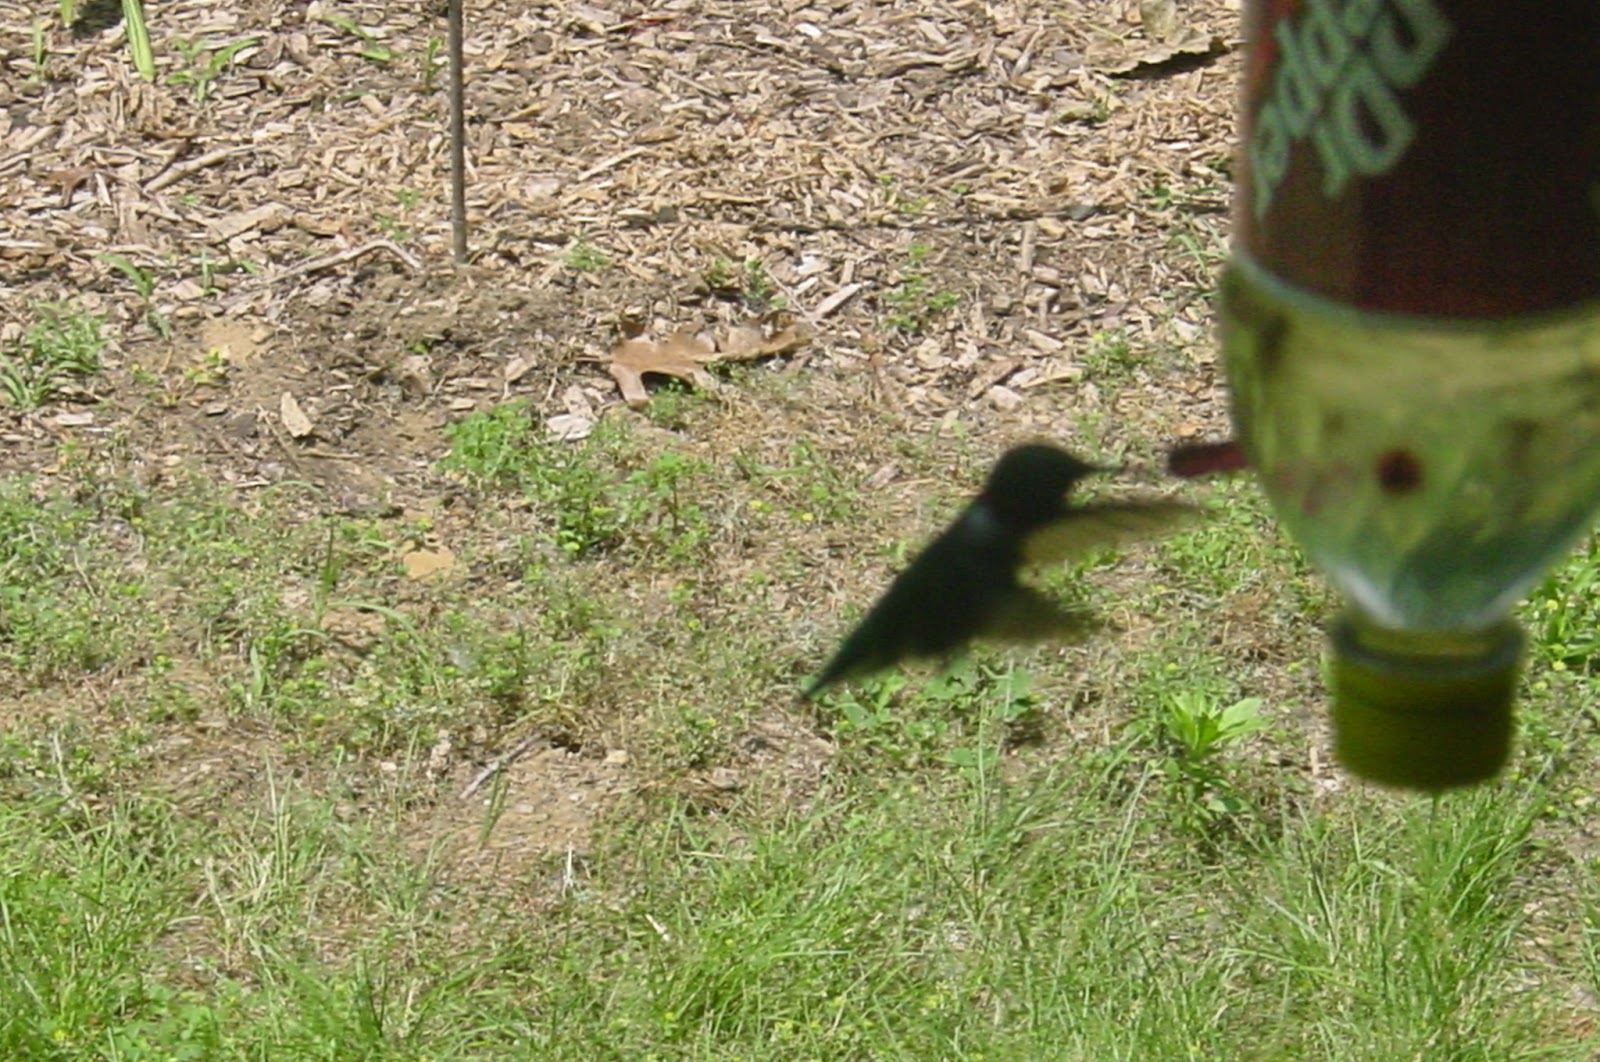 Out of focus hummingbird hovers near a Dr. Pepper bottle feeder.